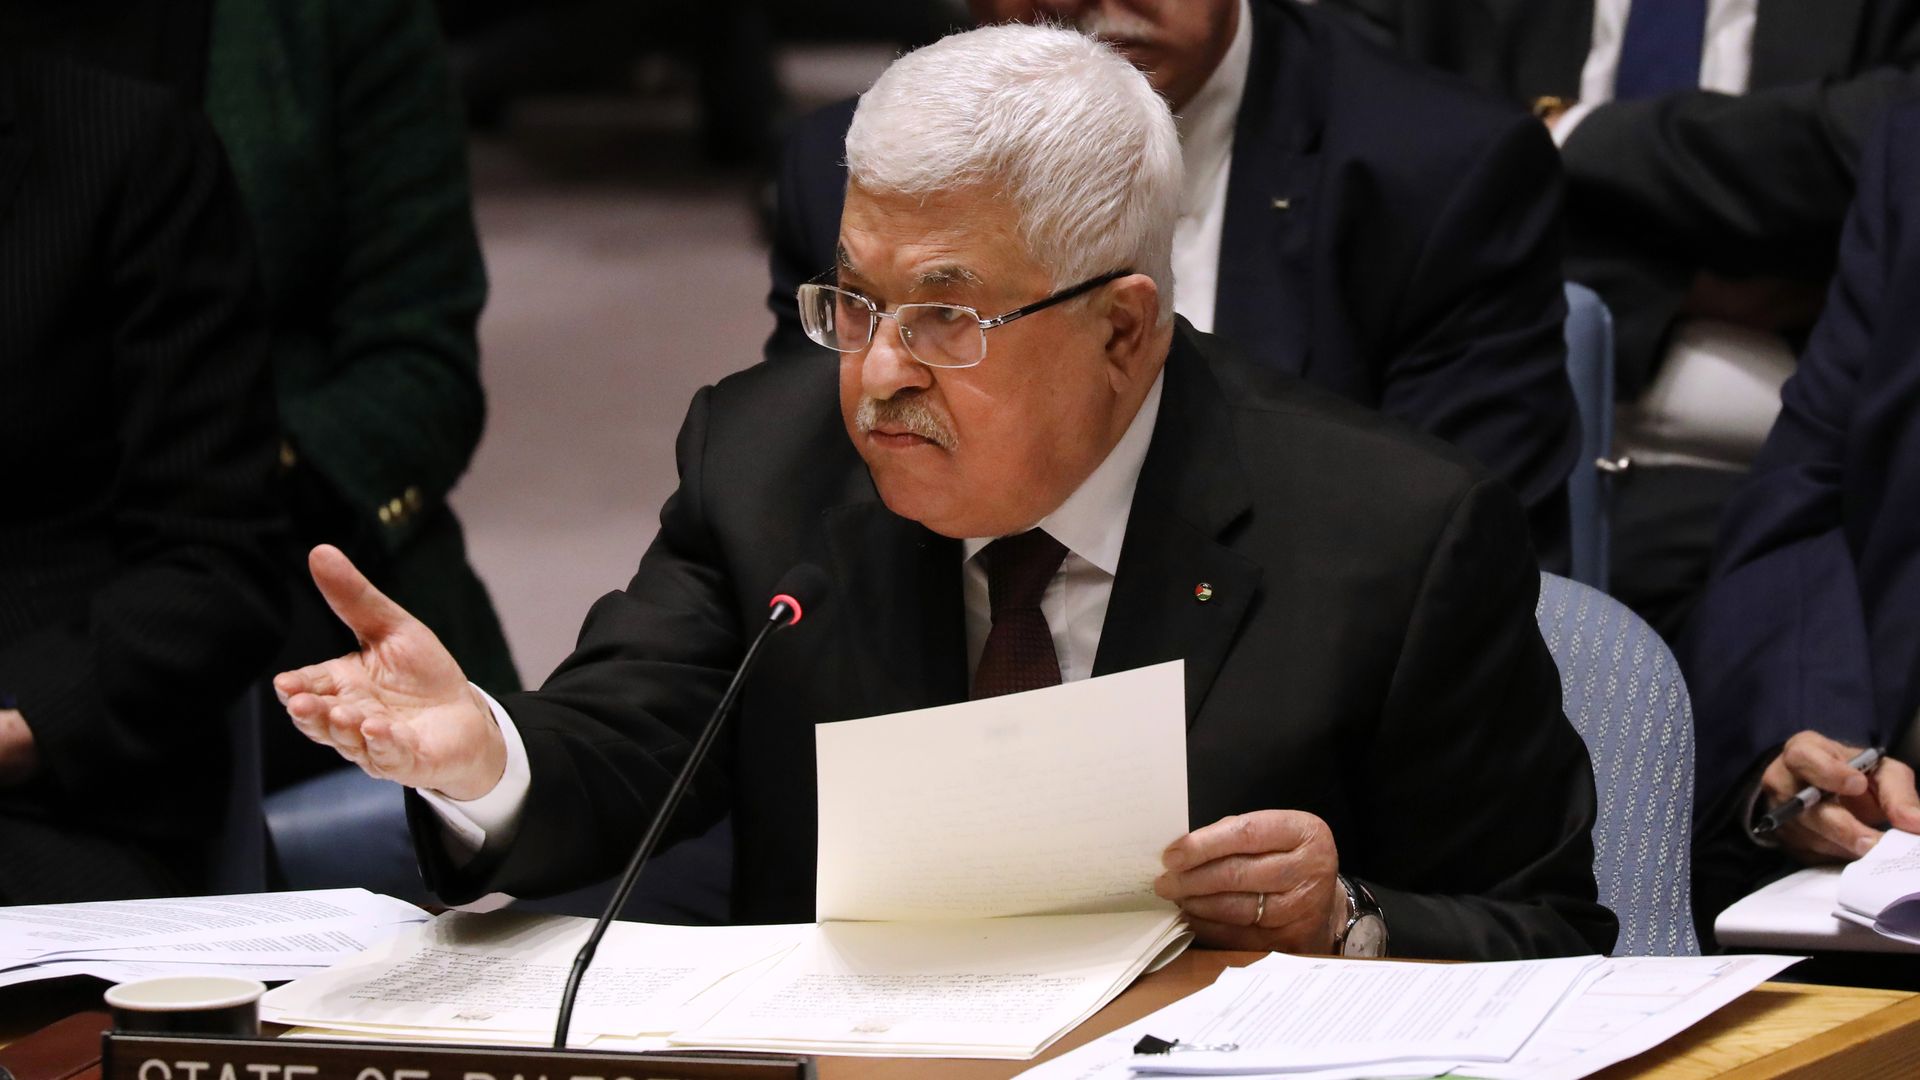 Palestinian President Mahmoud Abbas speaks at the United Nations (UN) Security Council on February 11, 2020 in New York City. 